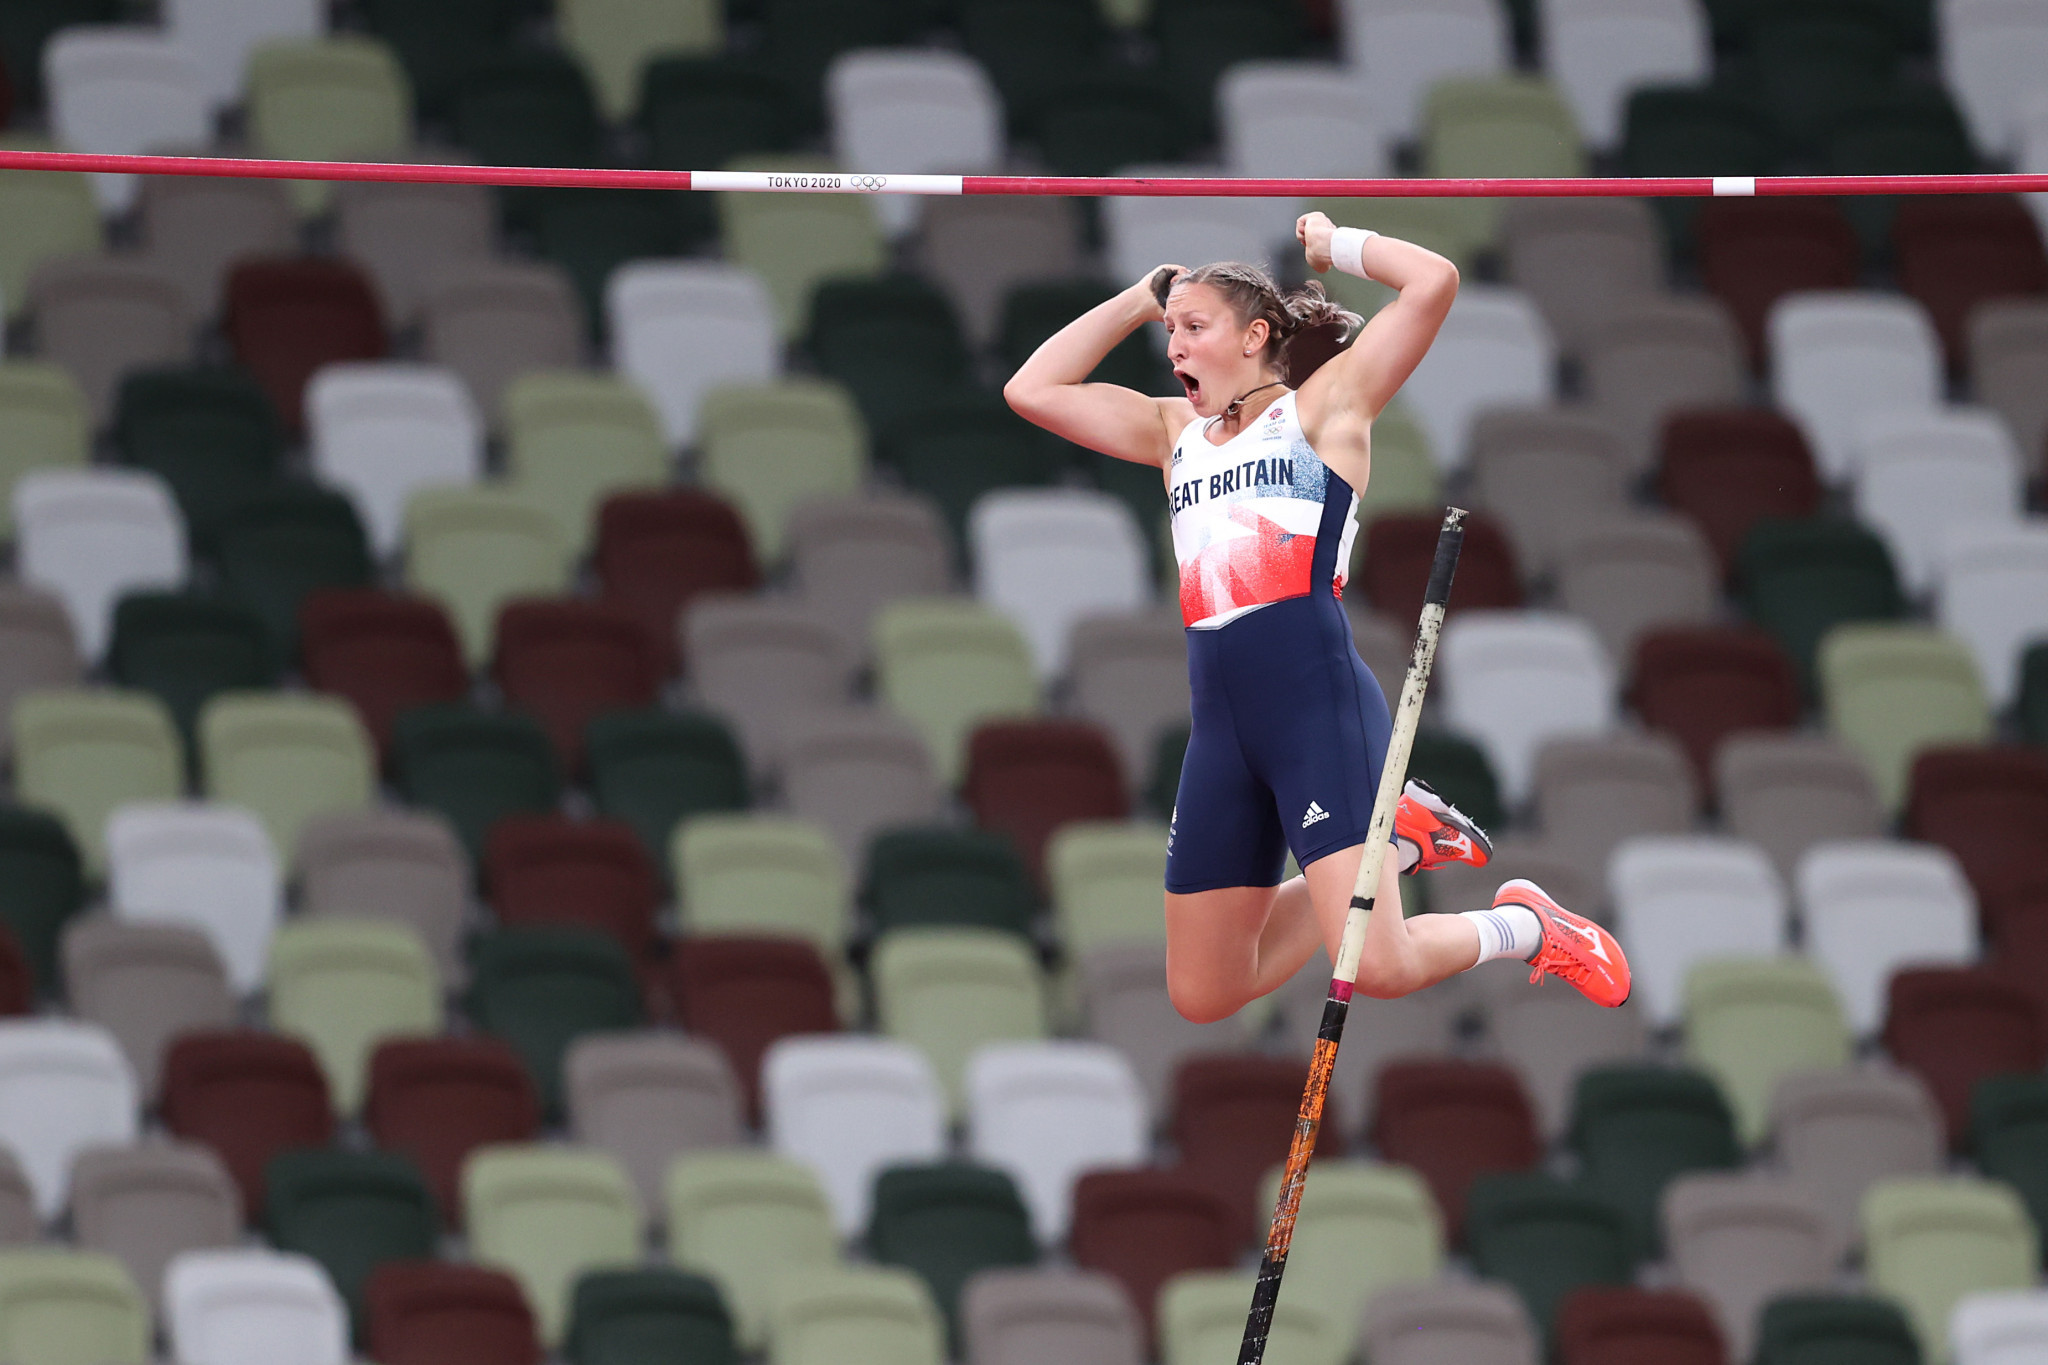 Holly Bradshaw claimed a bronze medal in women's pole vault at Tokyo 2020 ©Getty Images